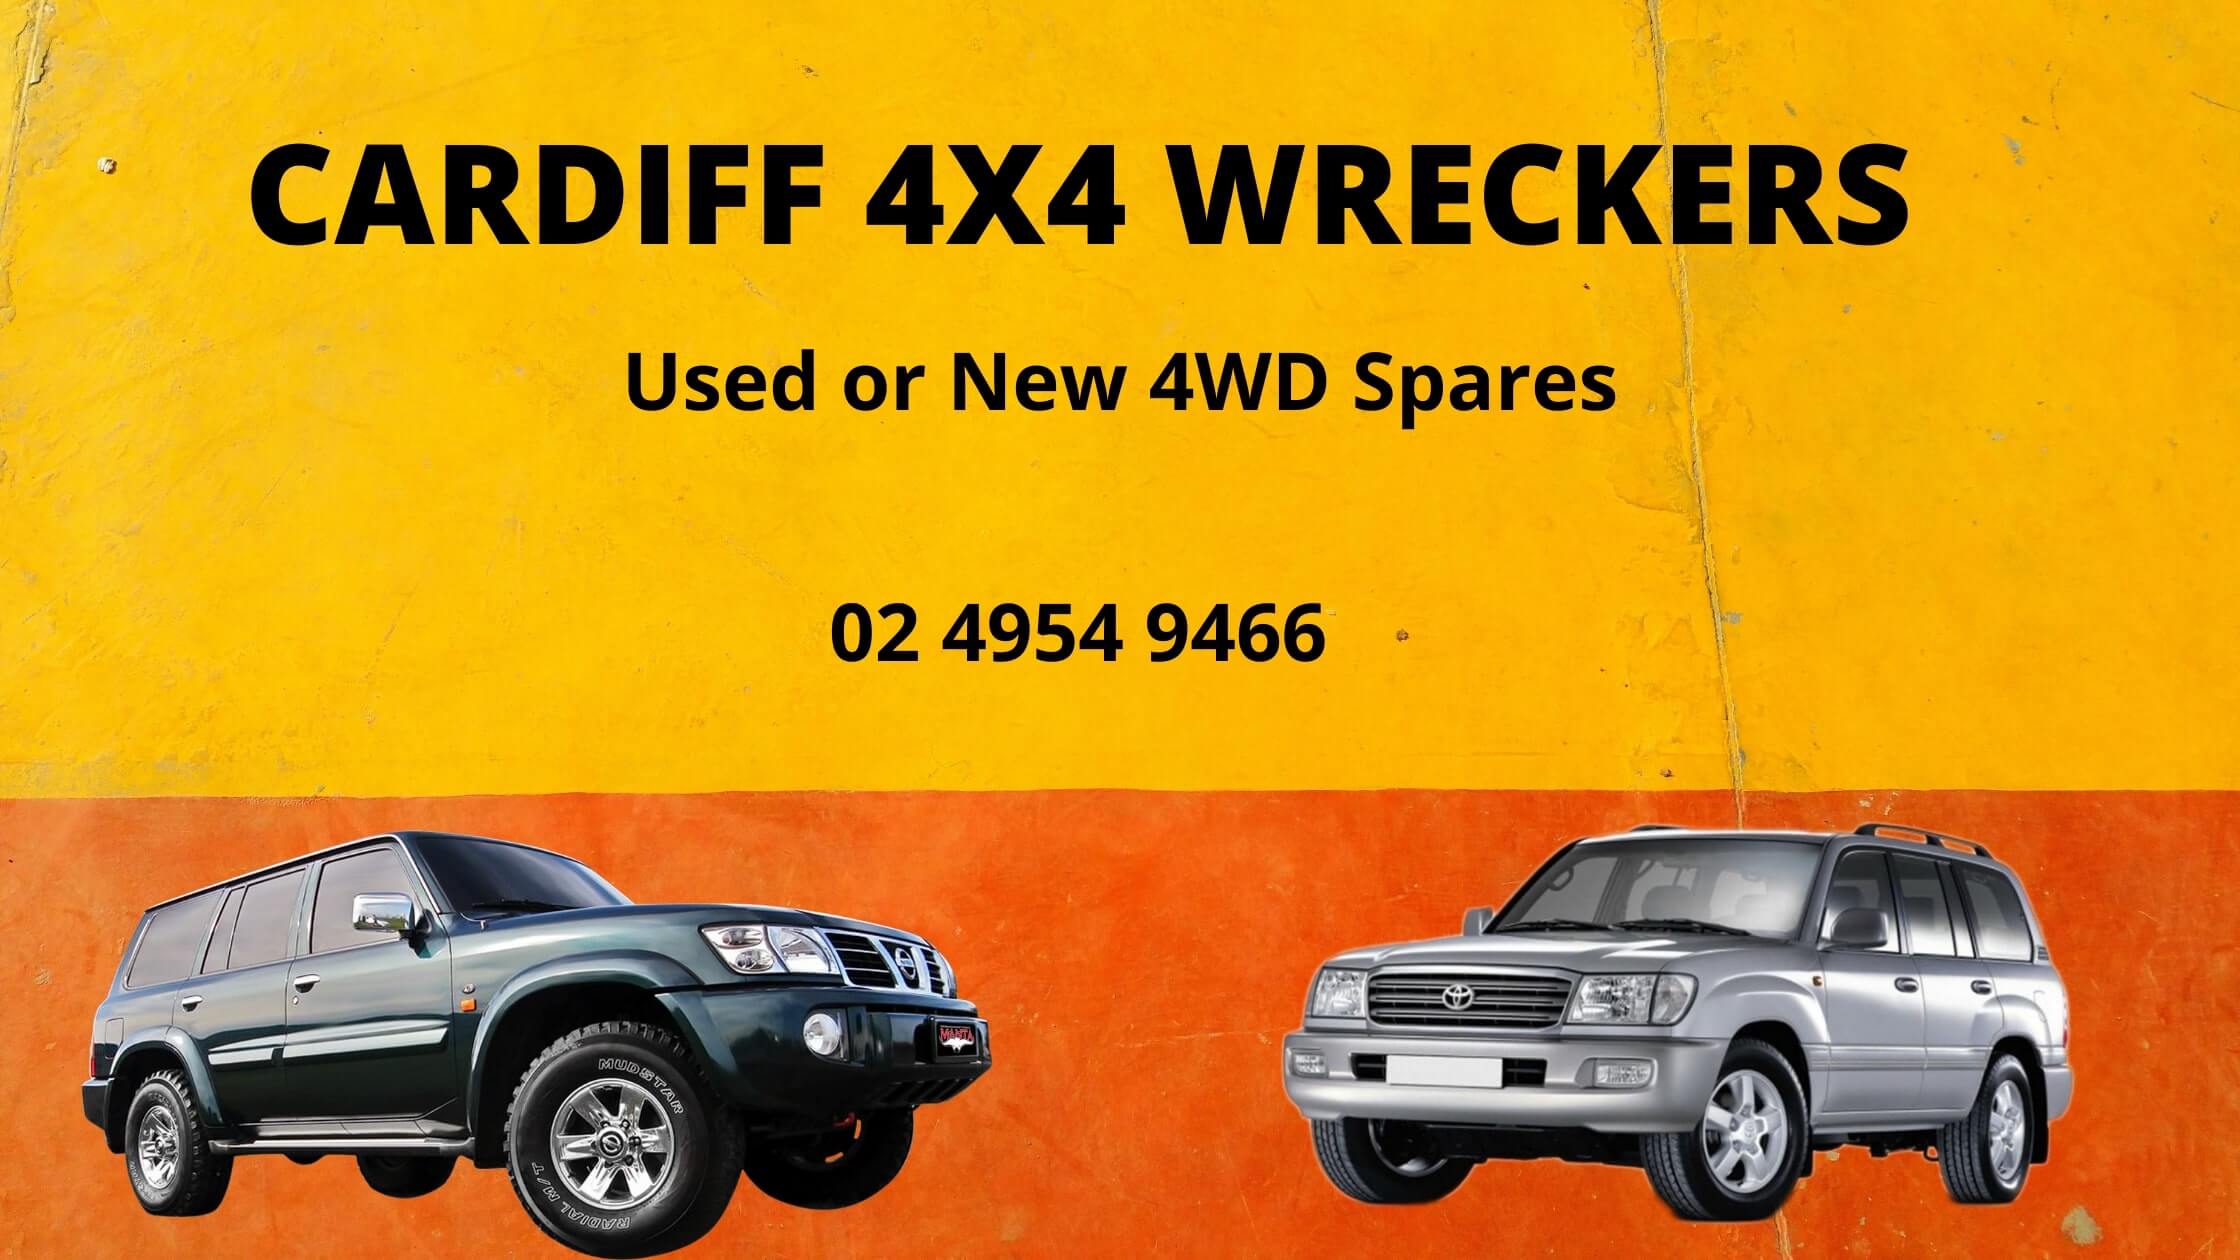 4x4 Wreckers